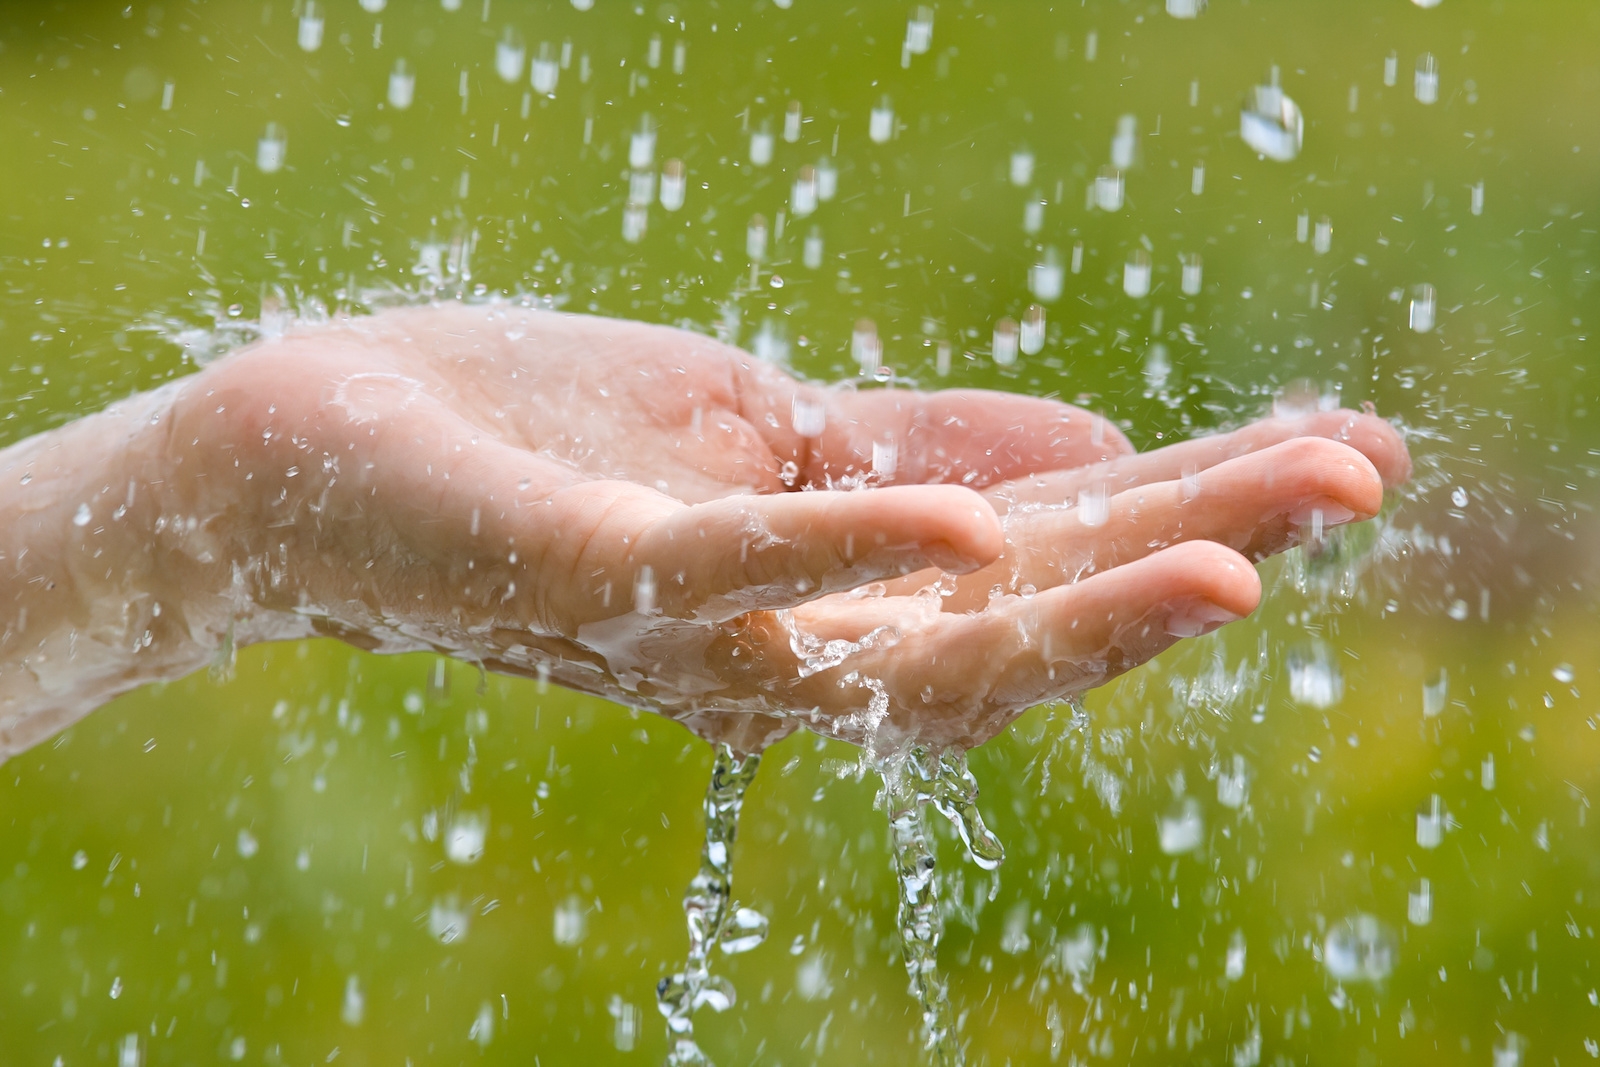 Is rain the cleanest water?